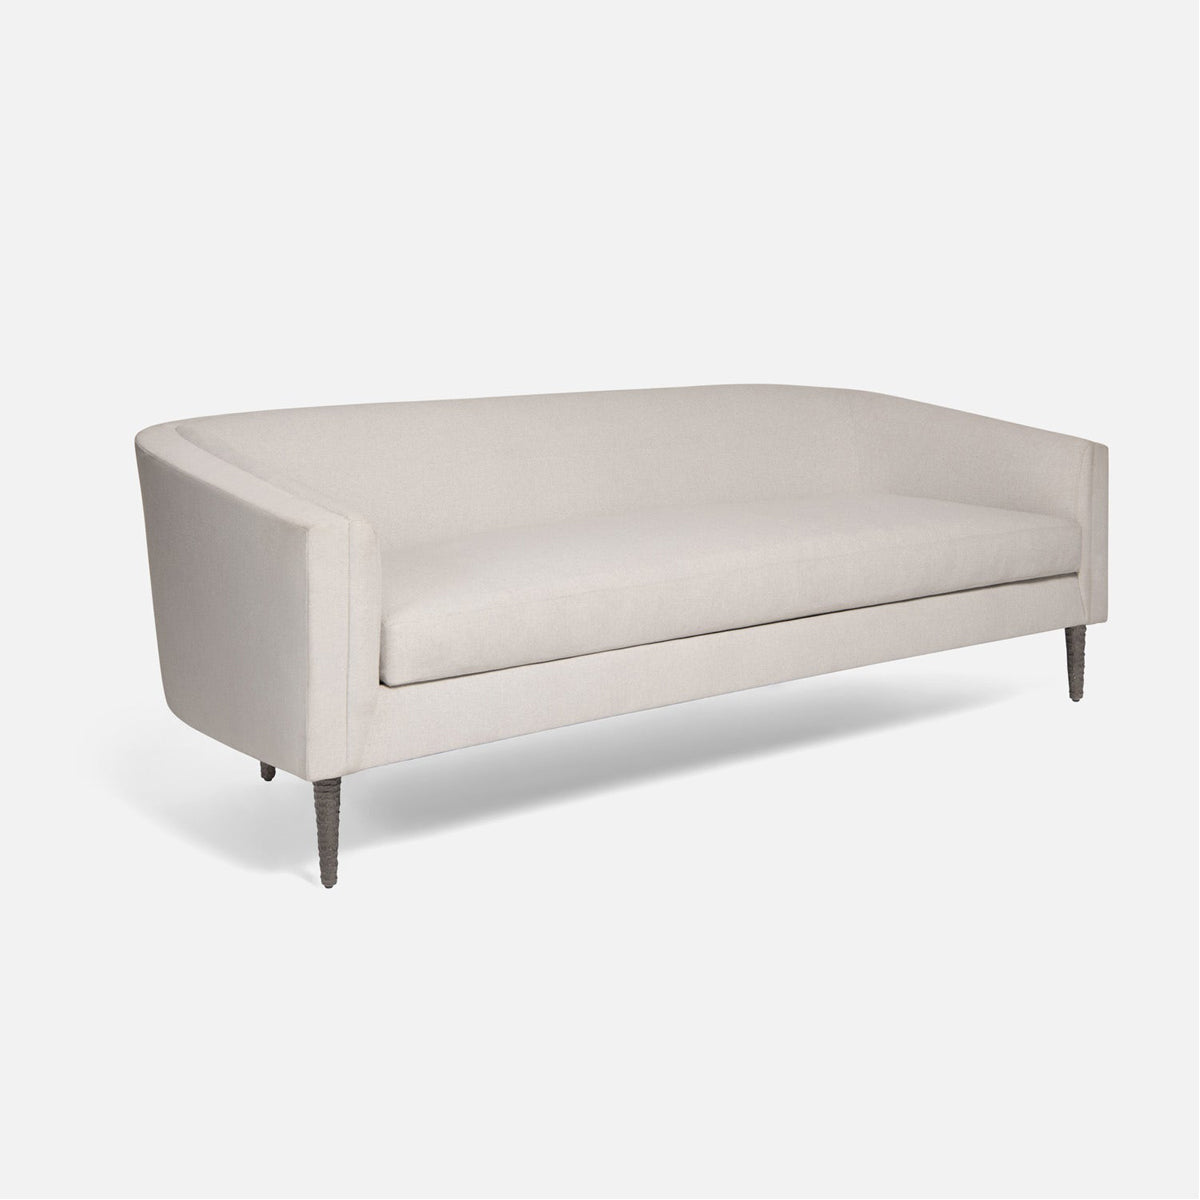 Made Goods Theron Upholstered Curved Back Sofa in Clyde Fabric